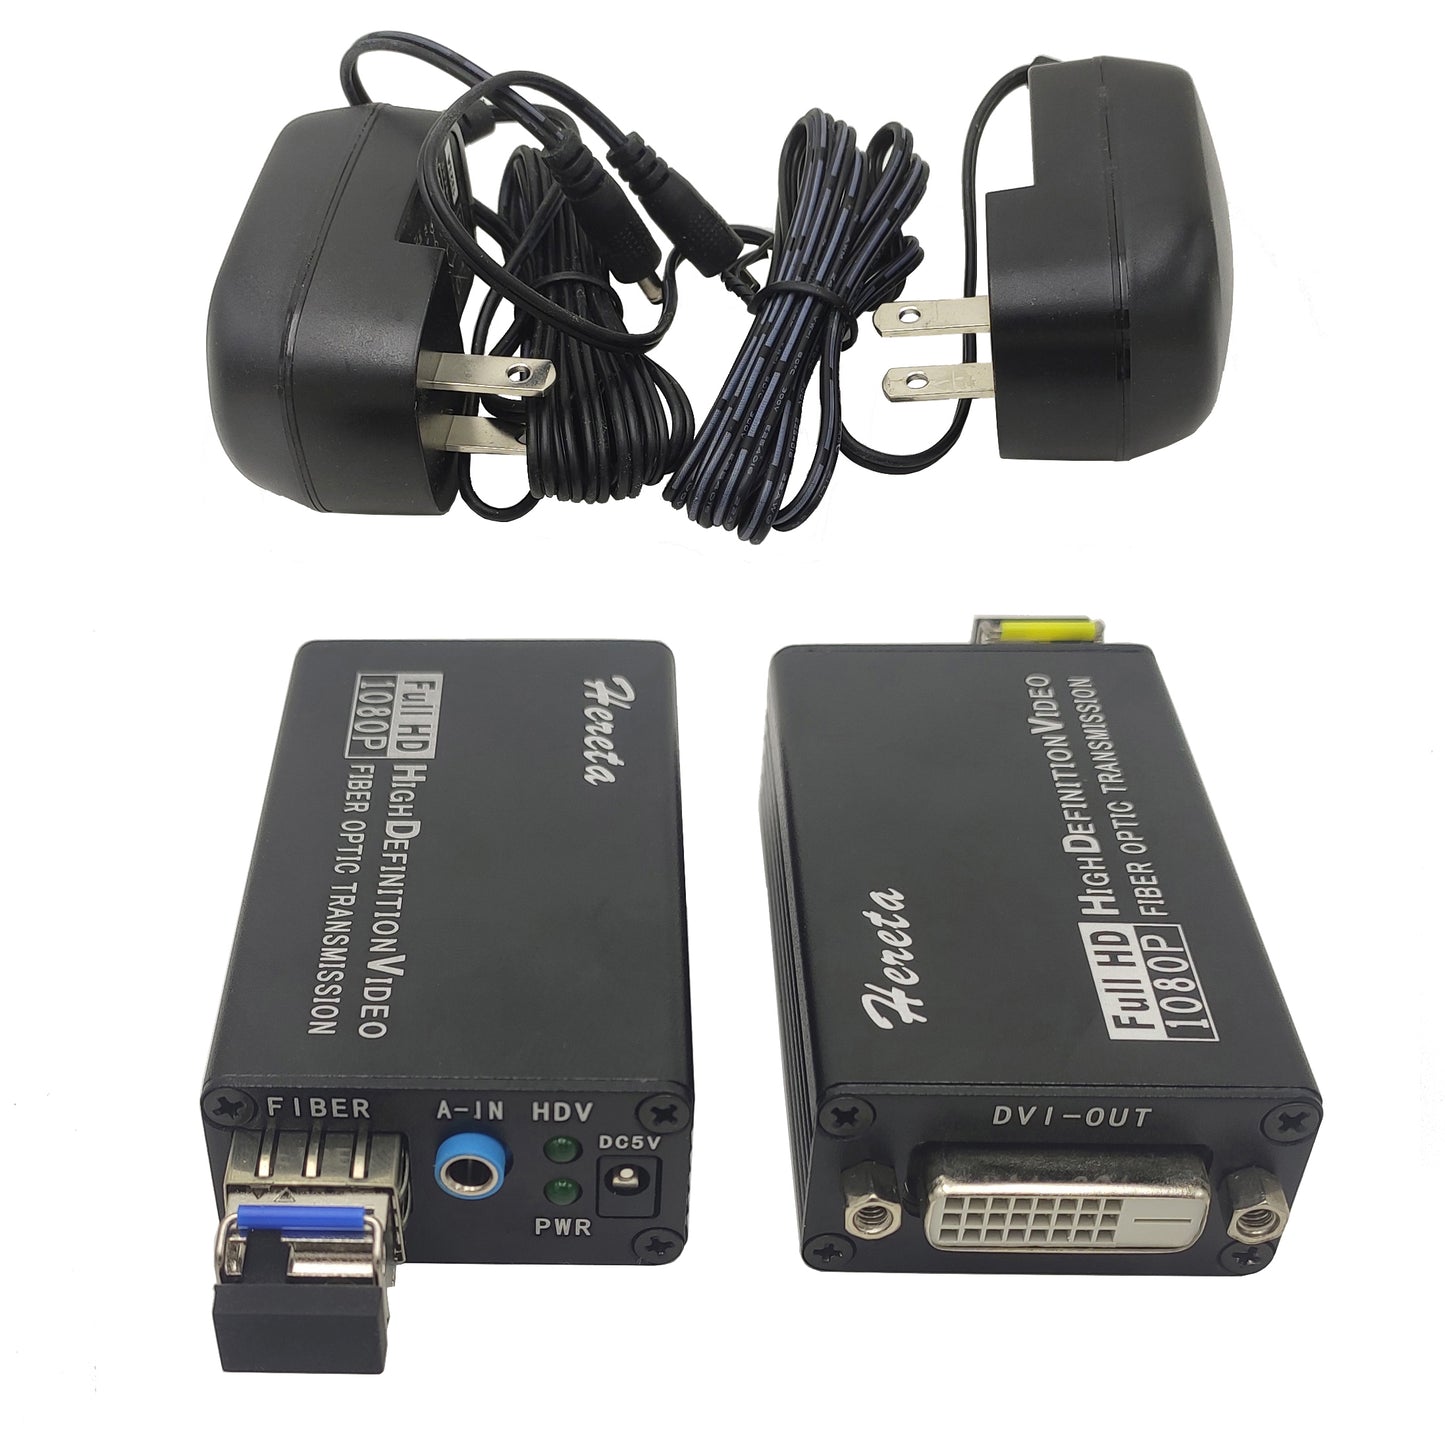 Mini DVI Fiber Converter 1080P HD Video Extender Optical Transceiver Extension of Distances Up to 20km Over Single-Mode with External Stereo Audio